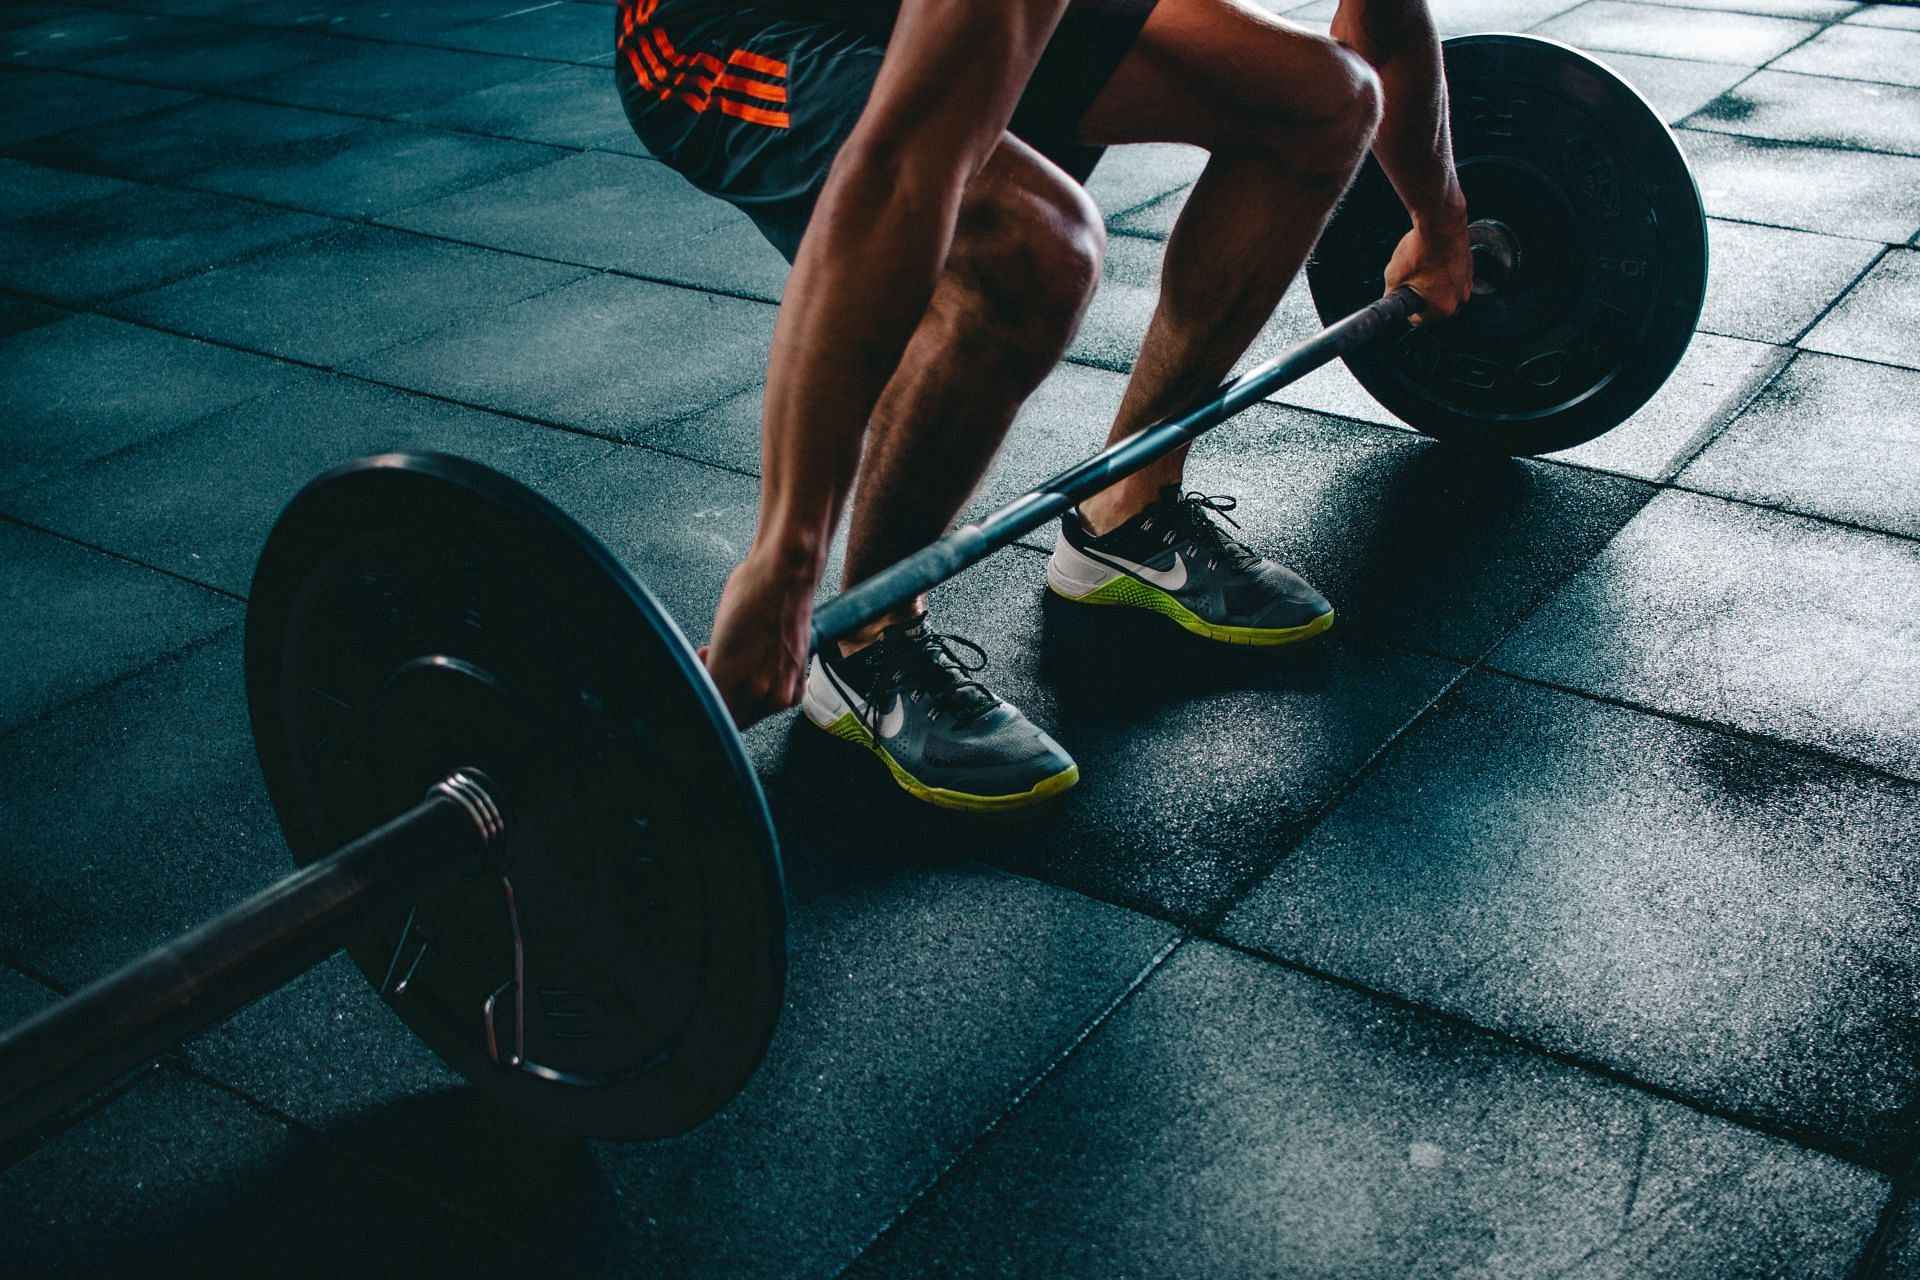 Bodybuilding exercises offer a lot more variety than athletic or weightlifting training (Image via Pexels @Victor Freitas)